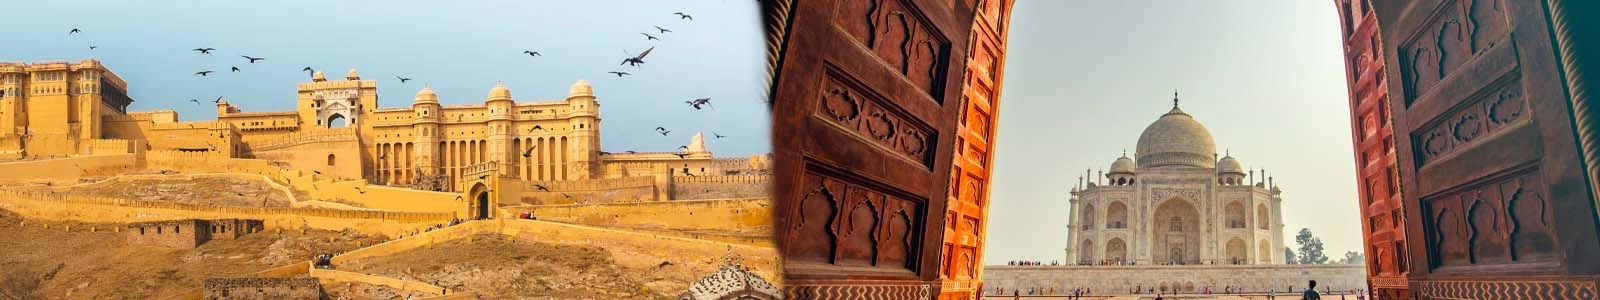 Golden Triangle Private Tour of Jaipur and Agra From New Delhi